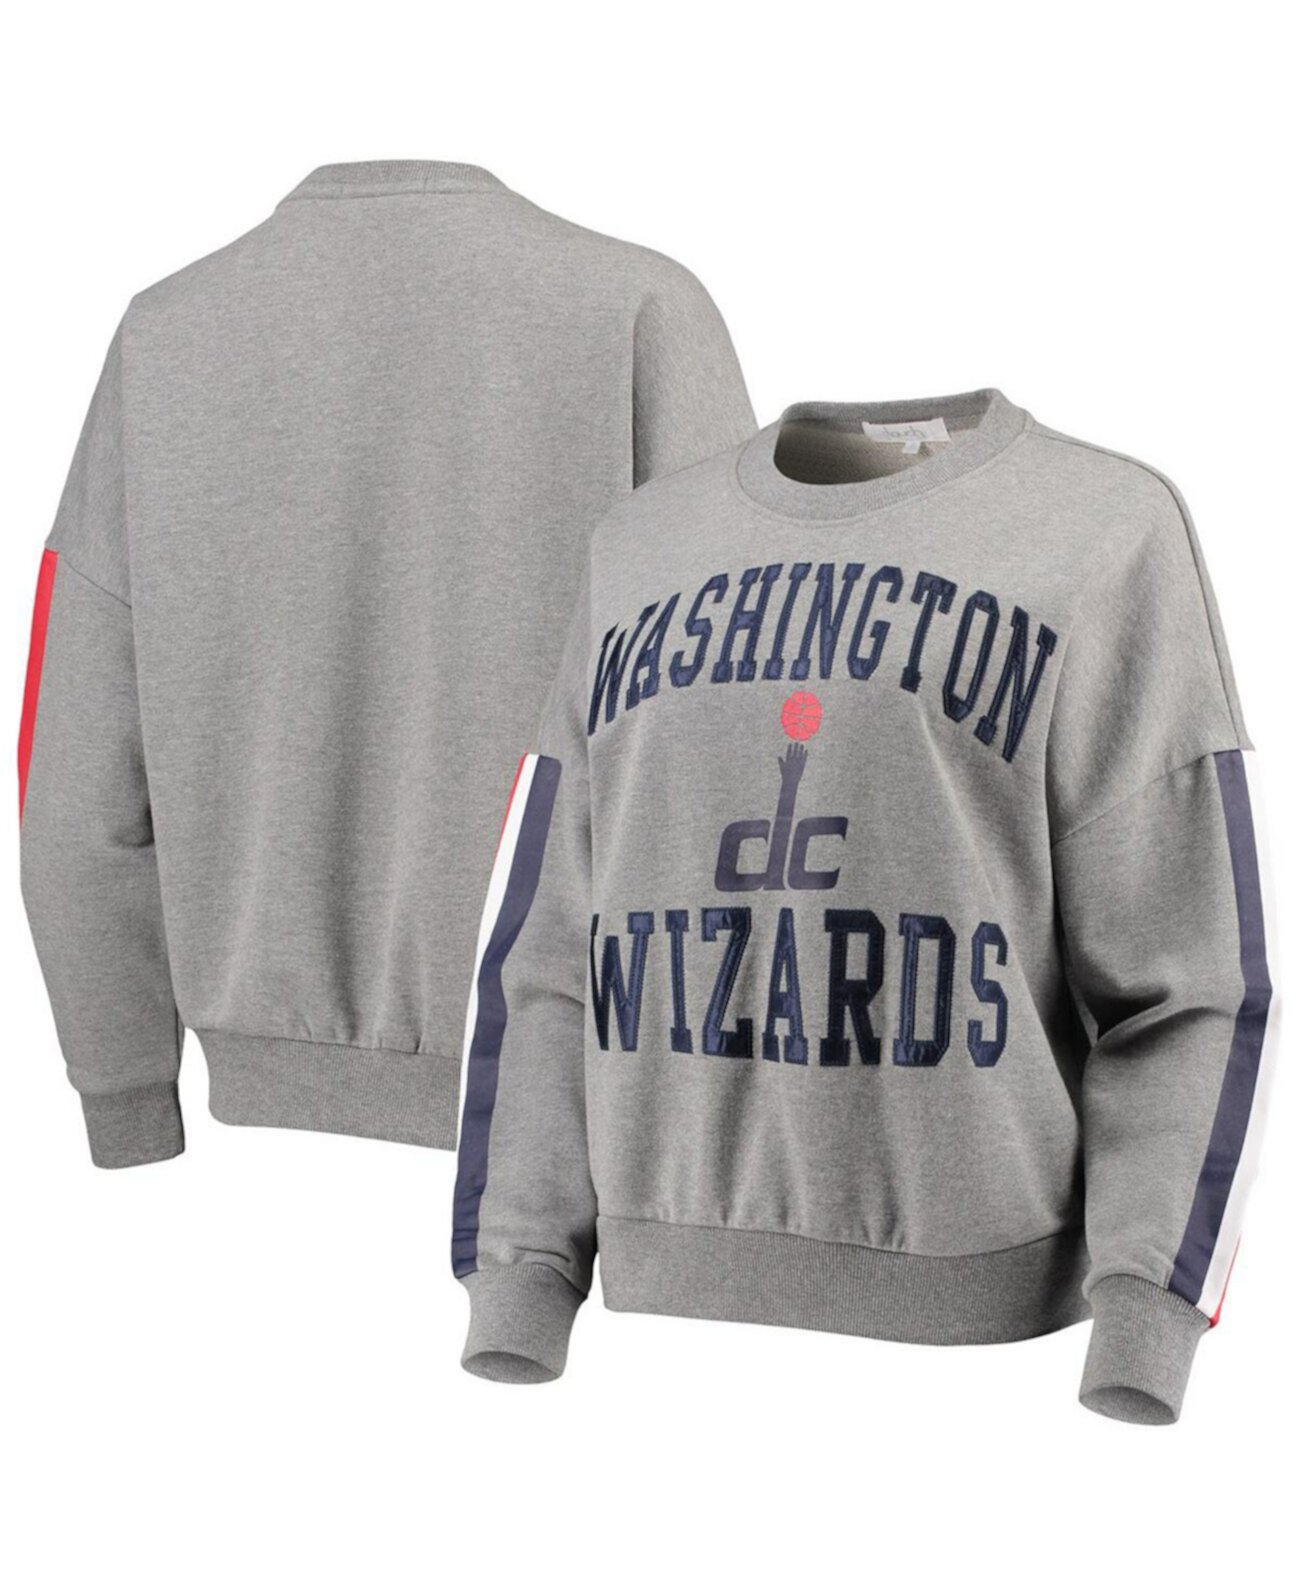 Women's Gray Washington Wizards Slouchy Rookie Pullover Sweatshirt Touch